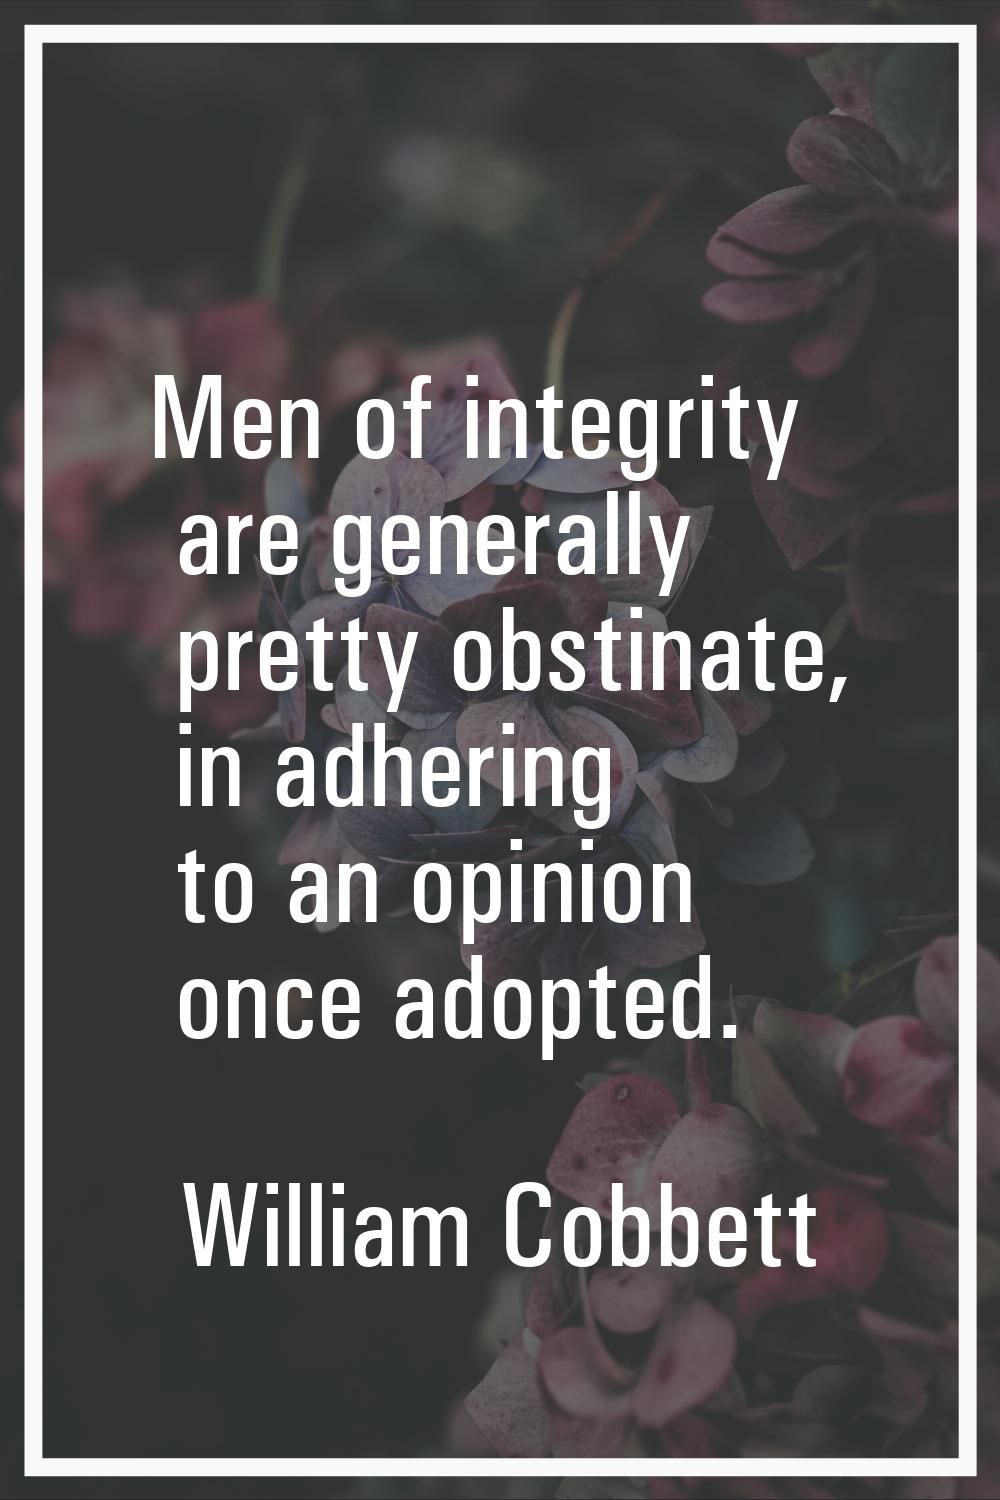 Men of integrity are generally pretty obstinate, in adhering to an opinion once adopted.